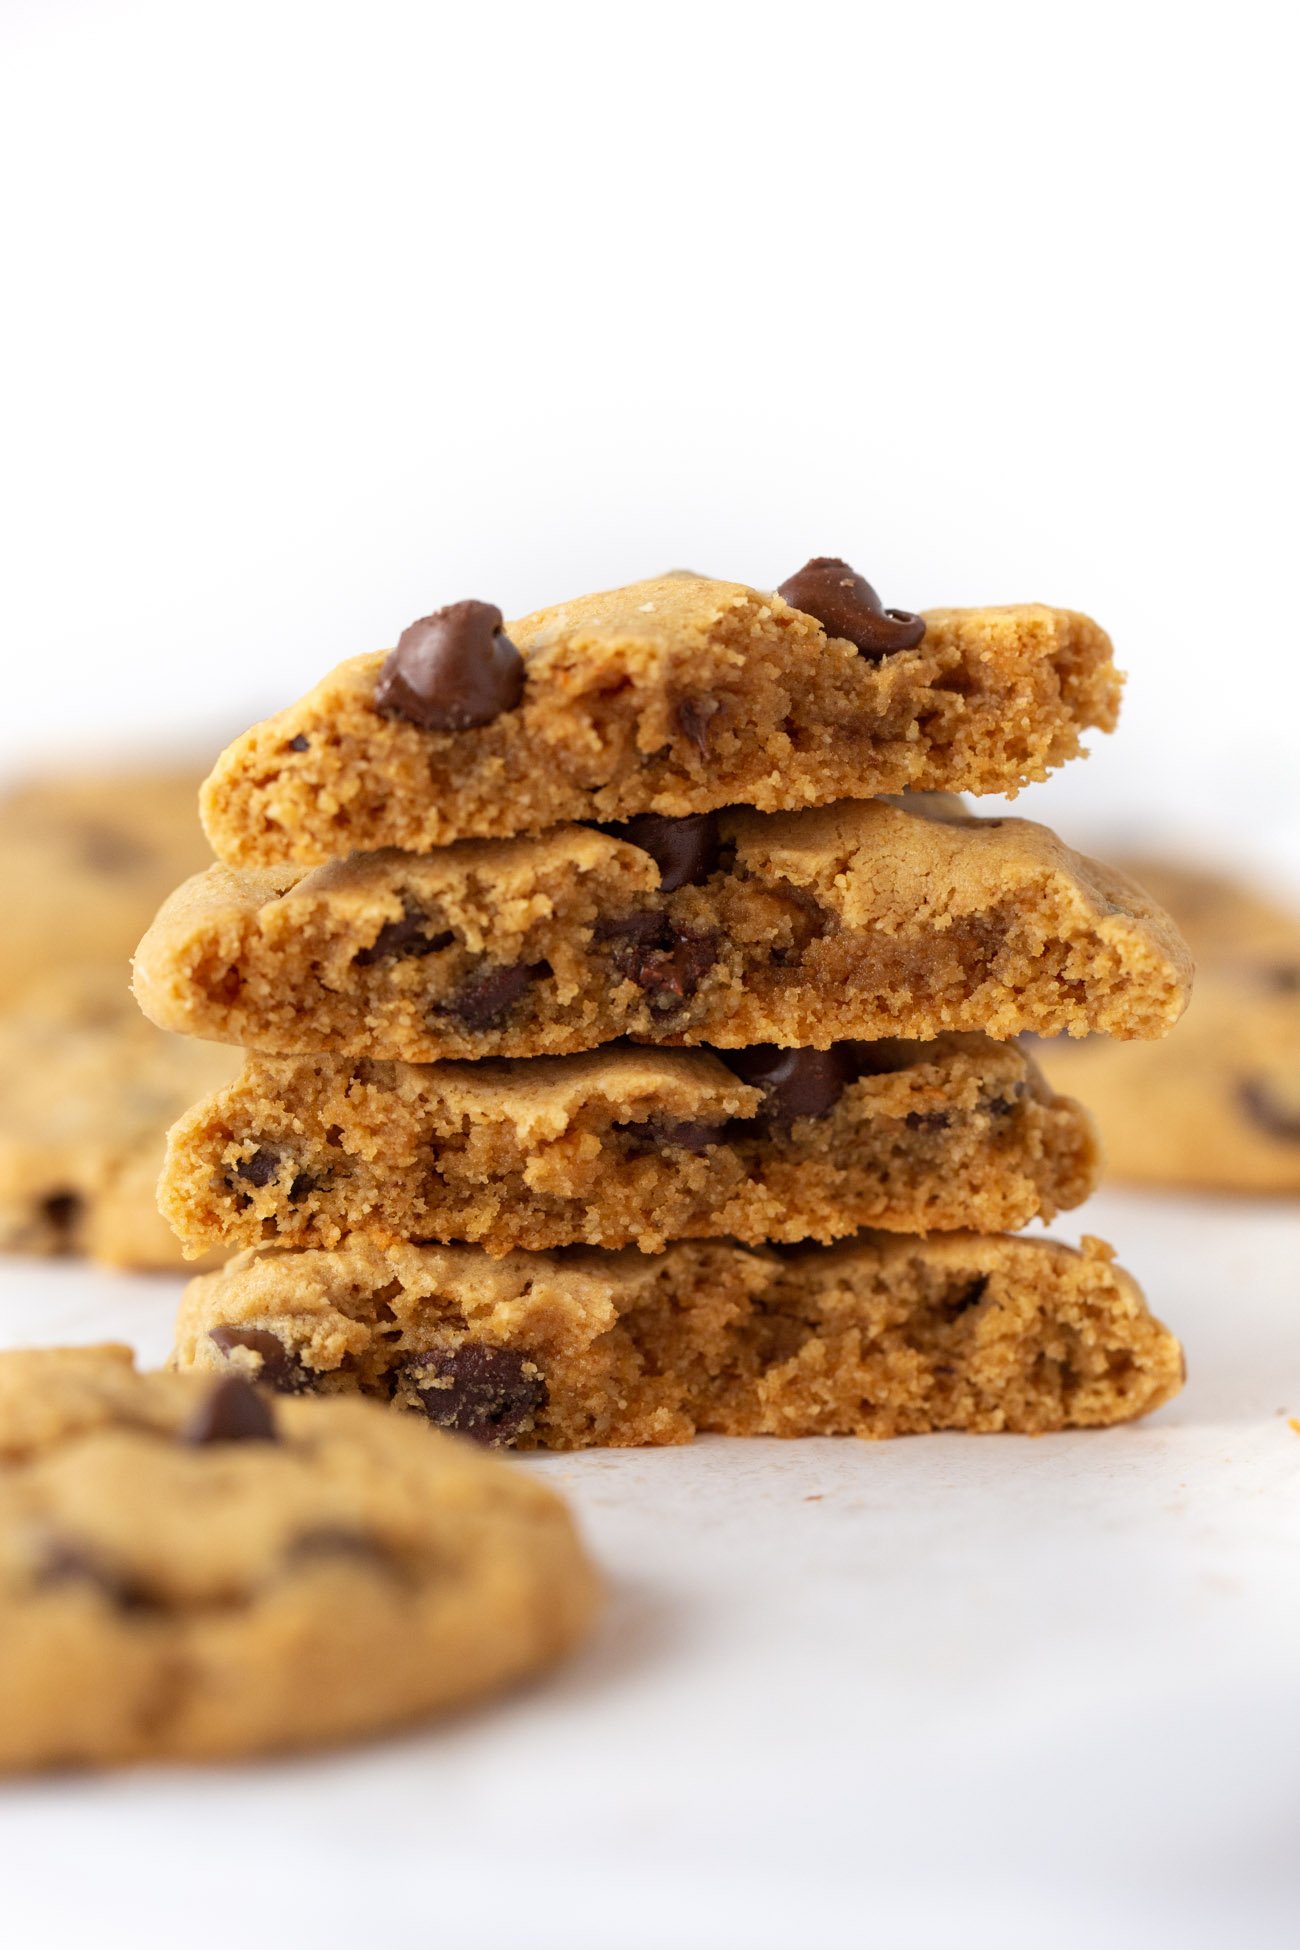 Stack of Chewy and Soft Gluten Free Peanut Butter Chocolate Chip Cookies